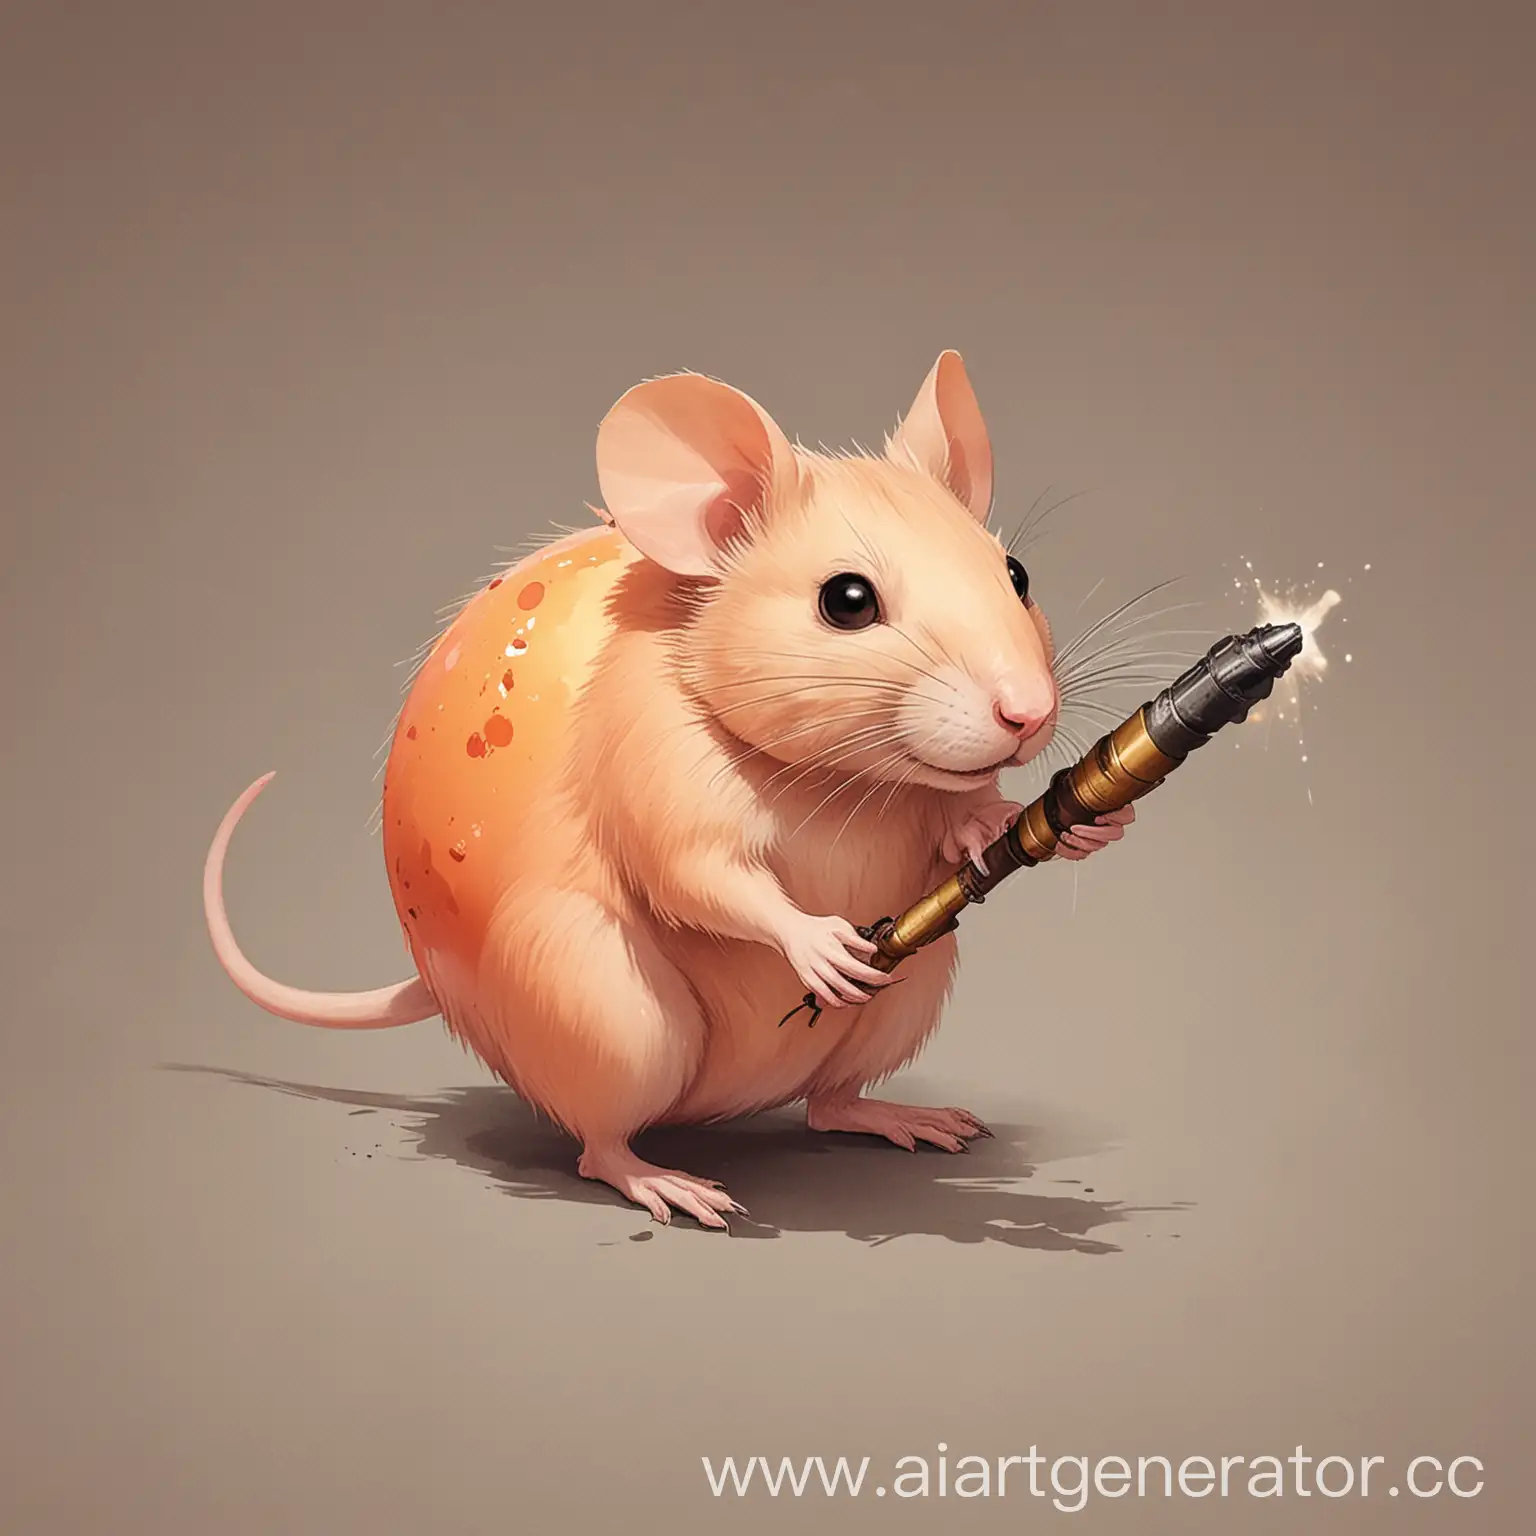 PeachColored-Rat-Launching-a-Bomb-Mischief-in-Motion